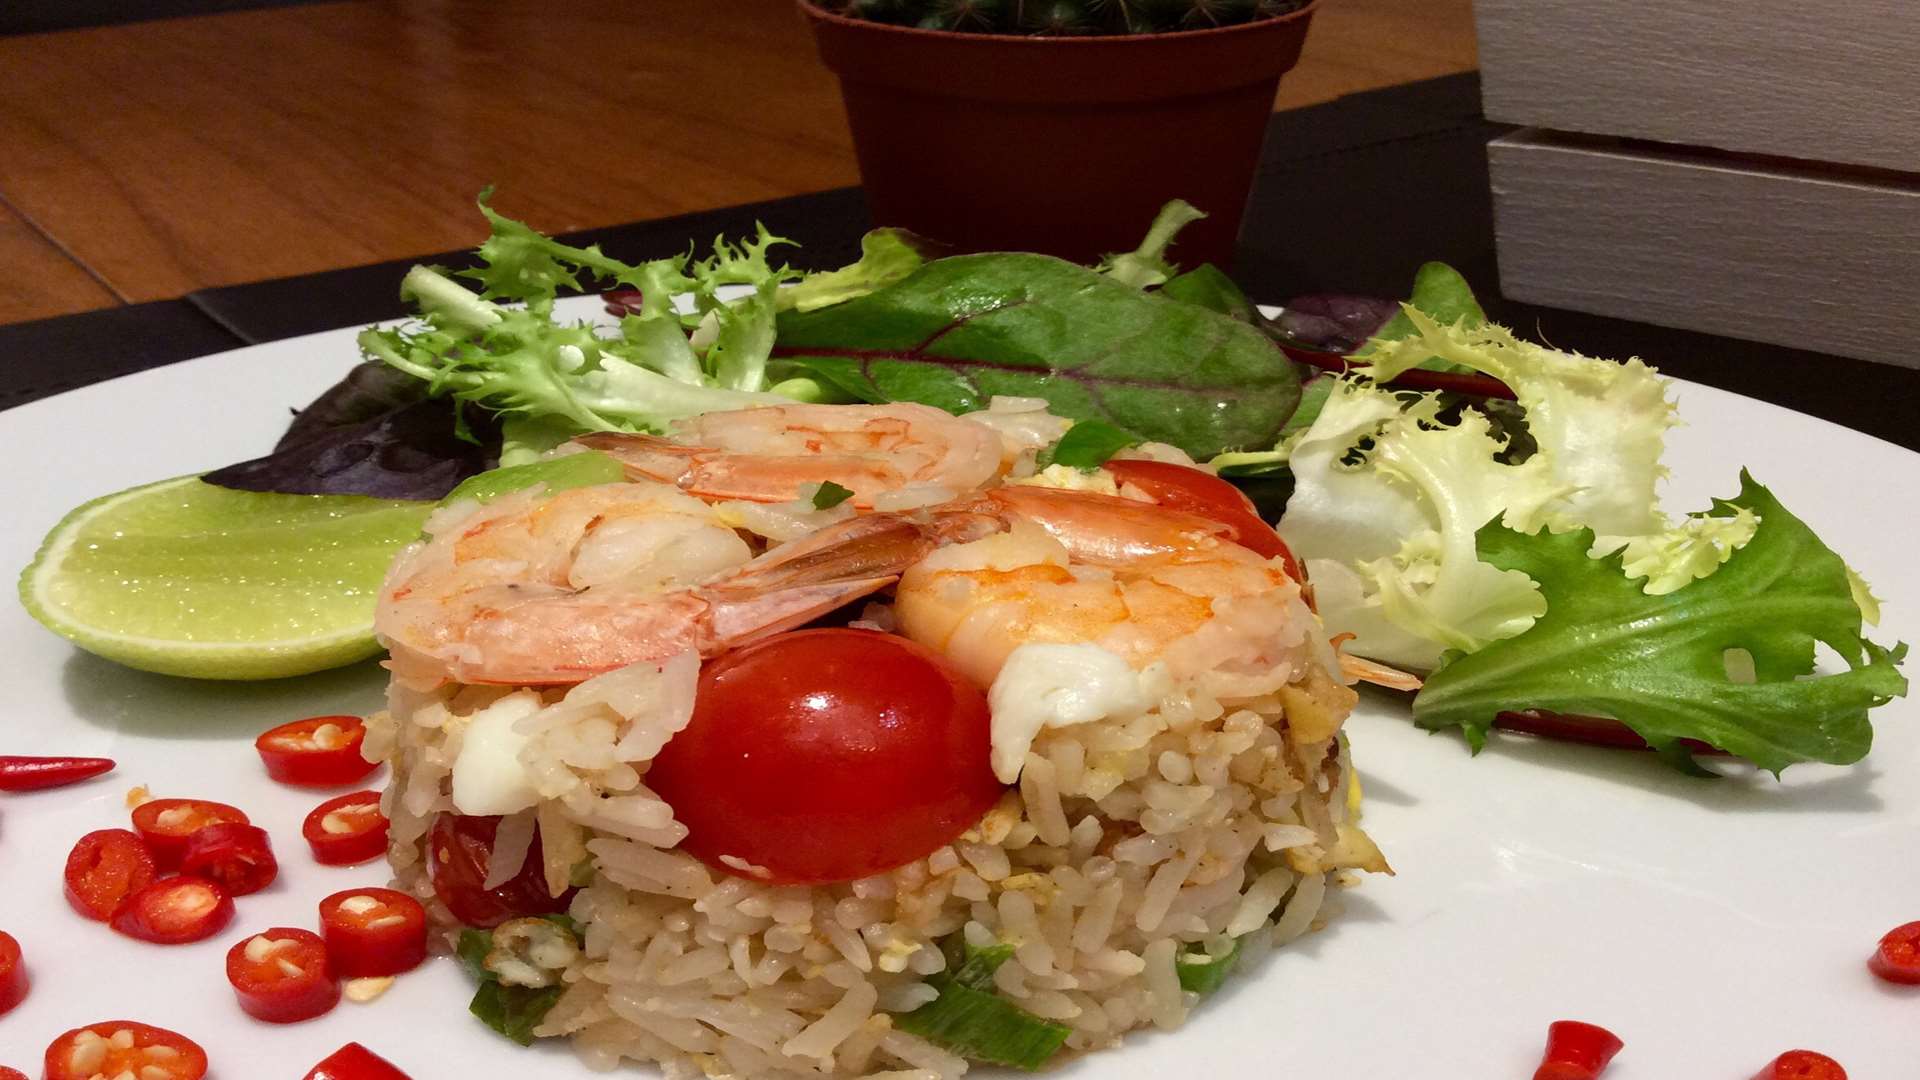 King prawns and rice will be one of the dishes available